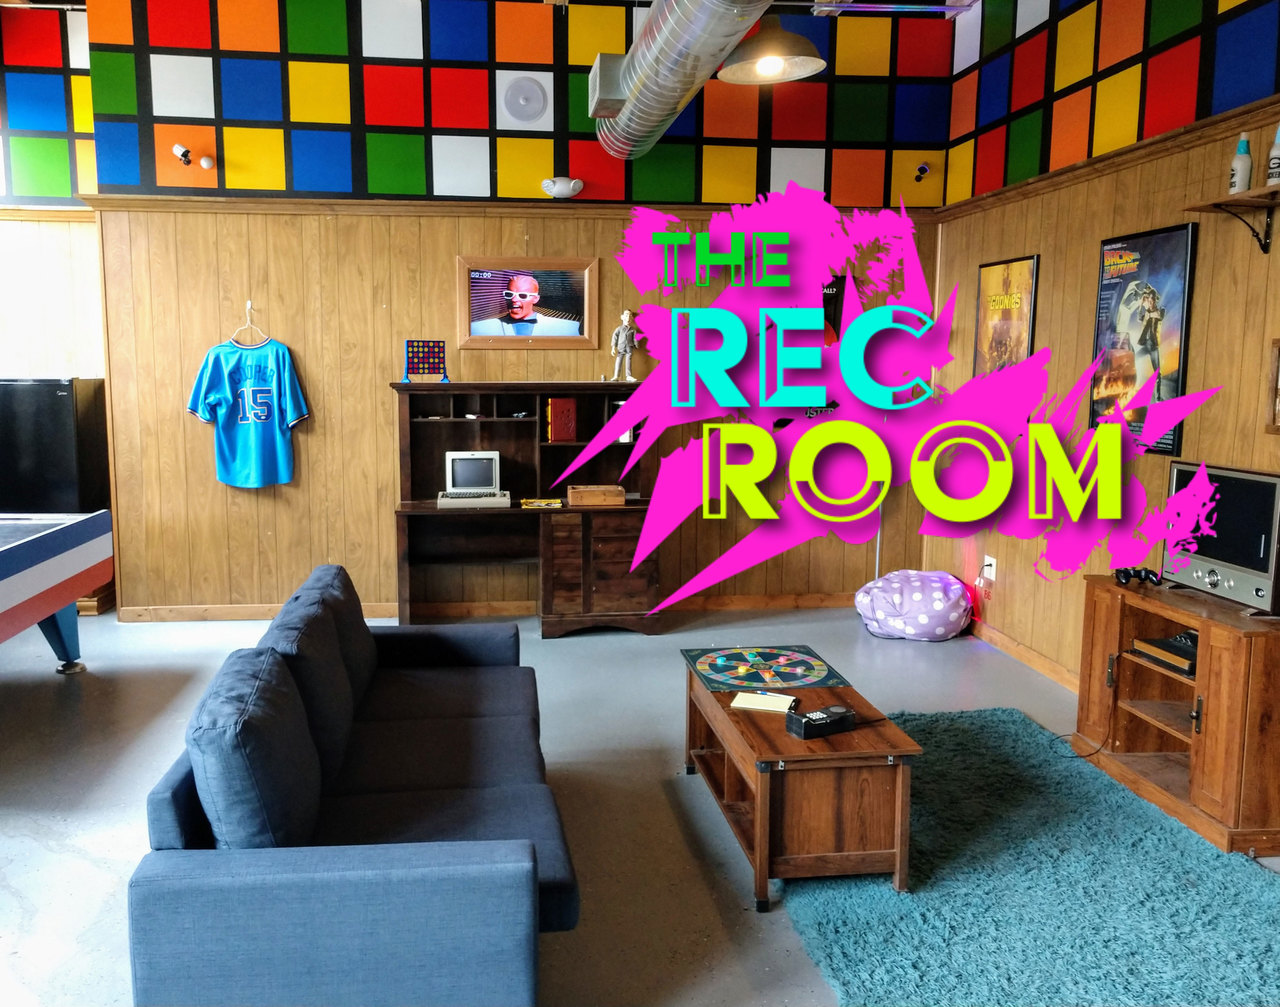 MIL Rec Room No TV 1 - The Theater